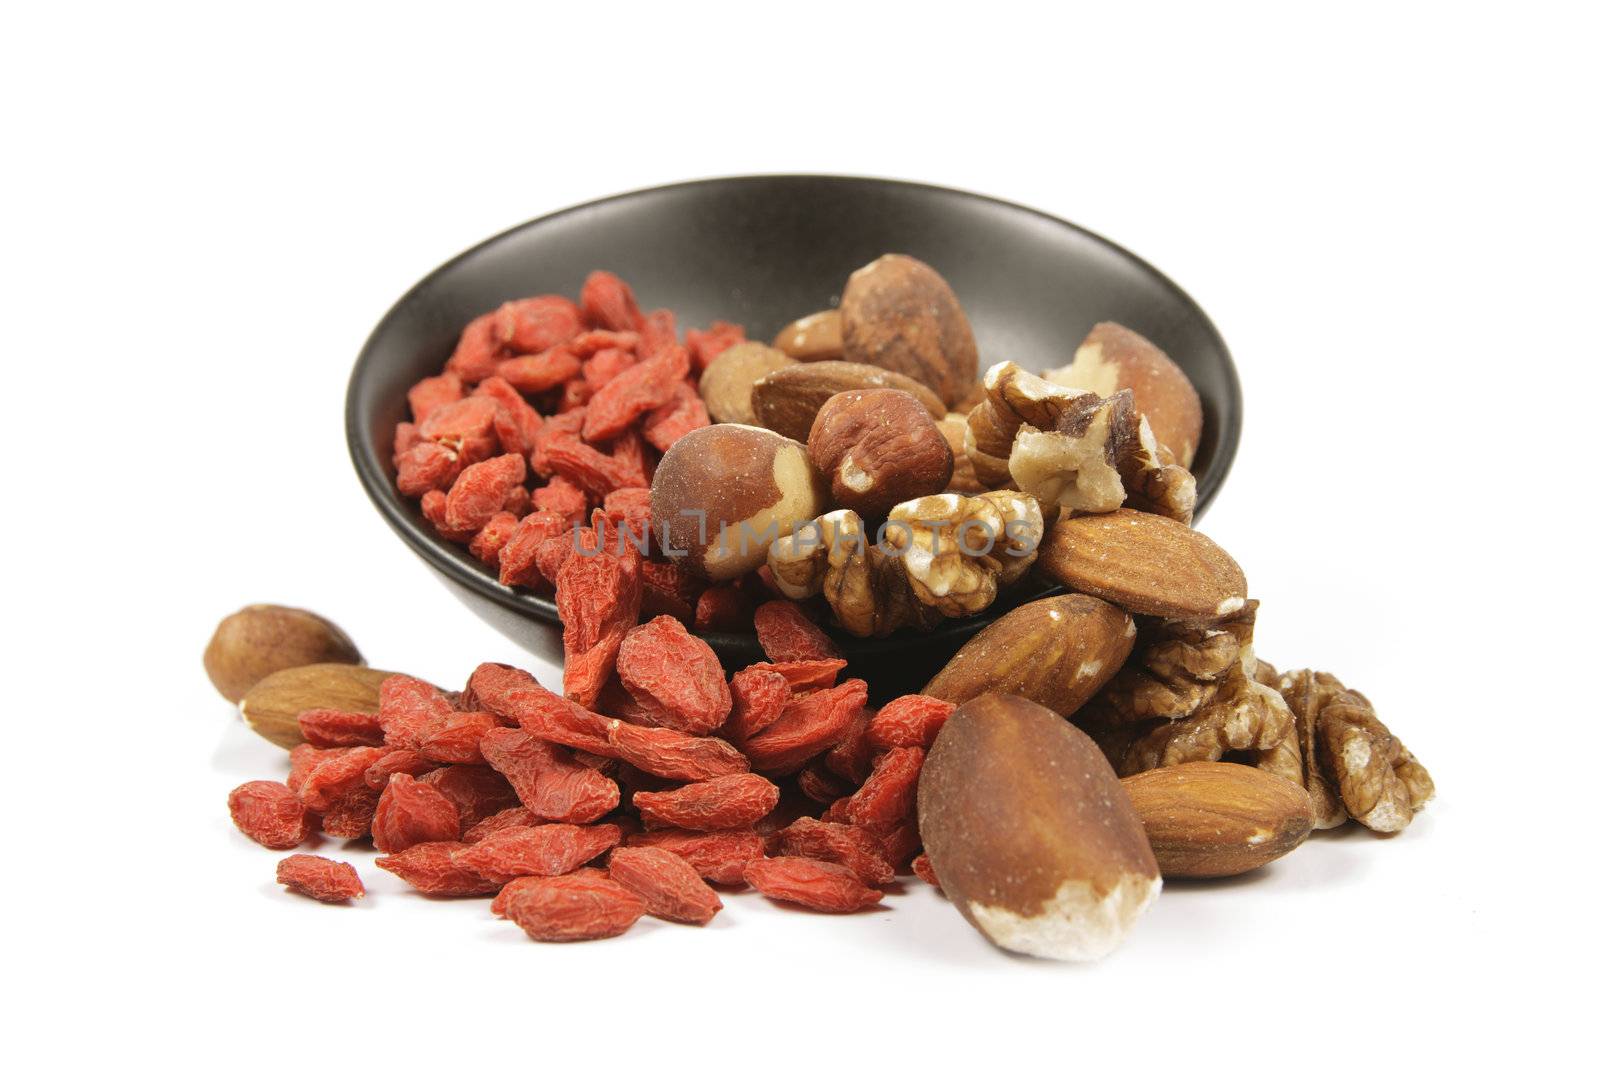 Red dry goji berries with mixed nuts spilling from a small black bowl on a reflective white background